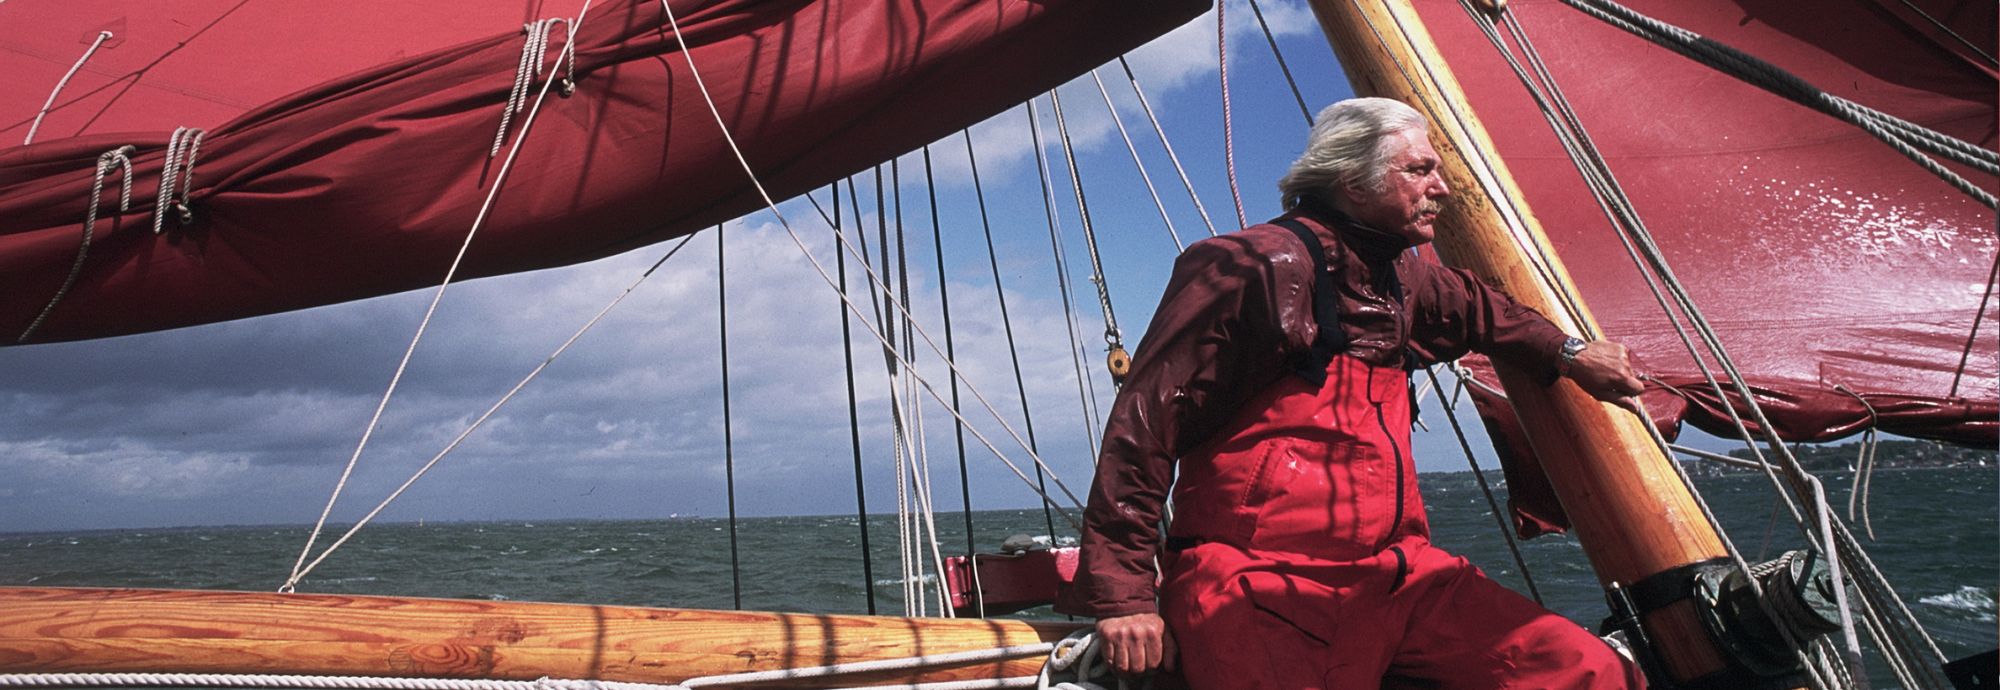 Tom Cunliffe aboard a sailing boat.